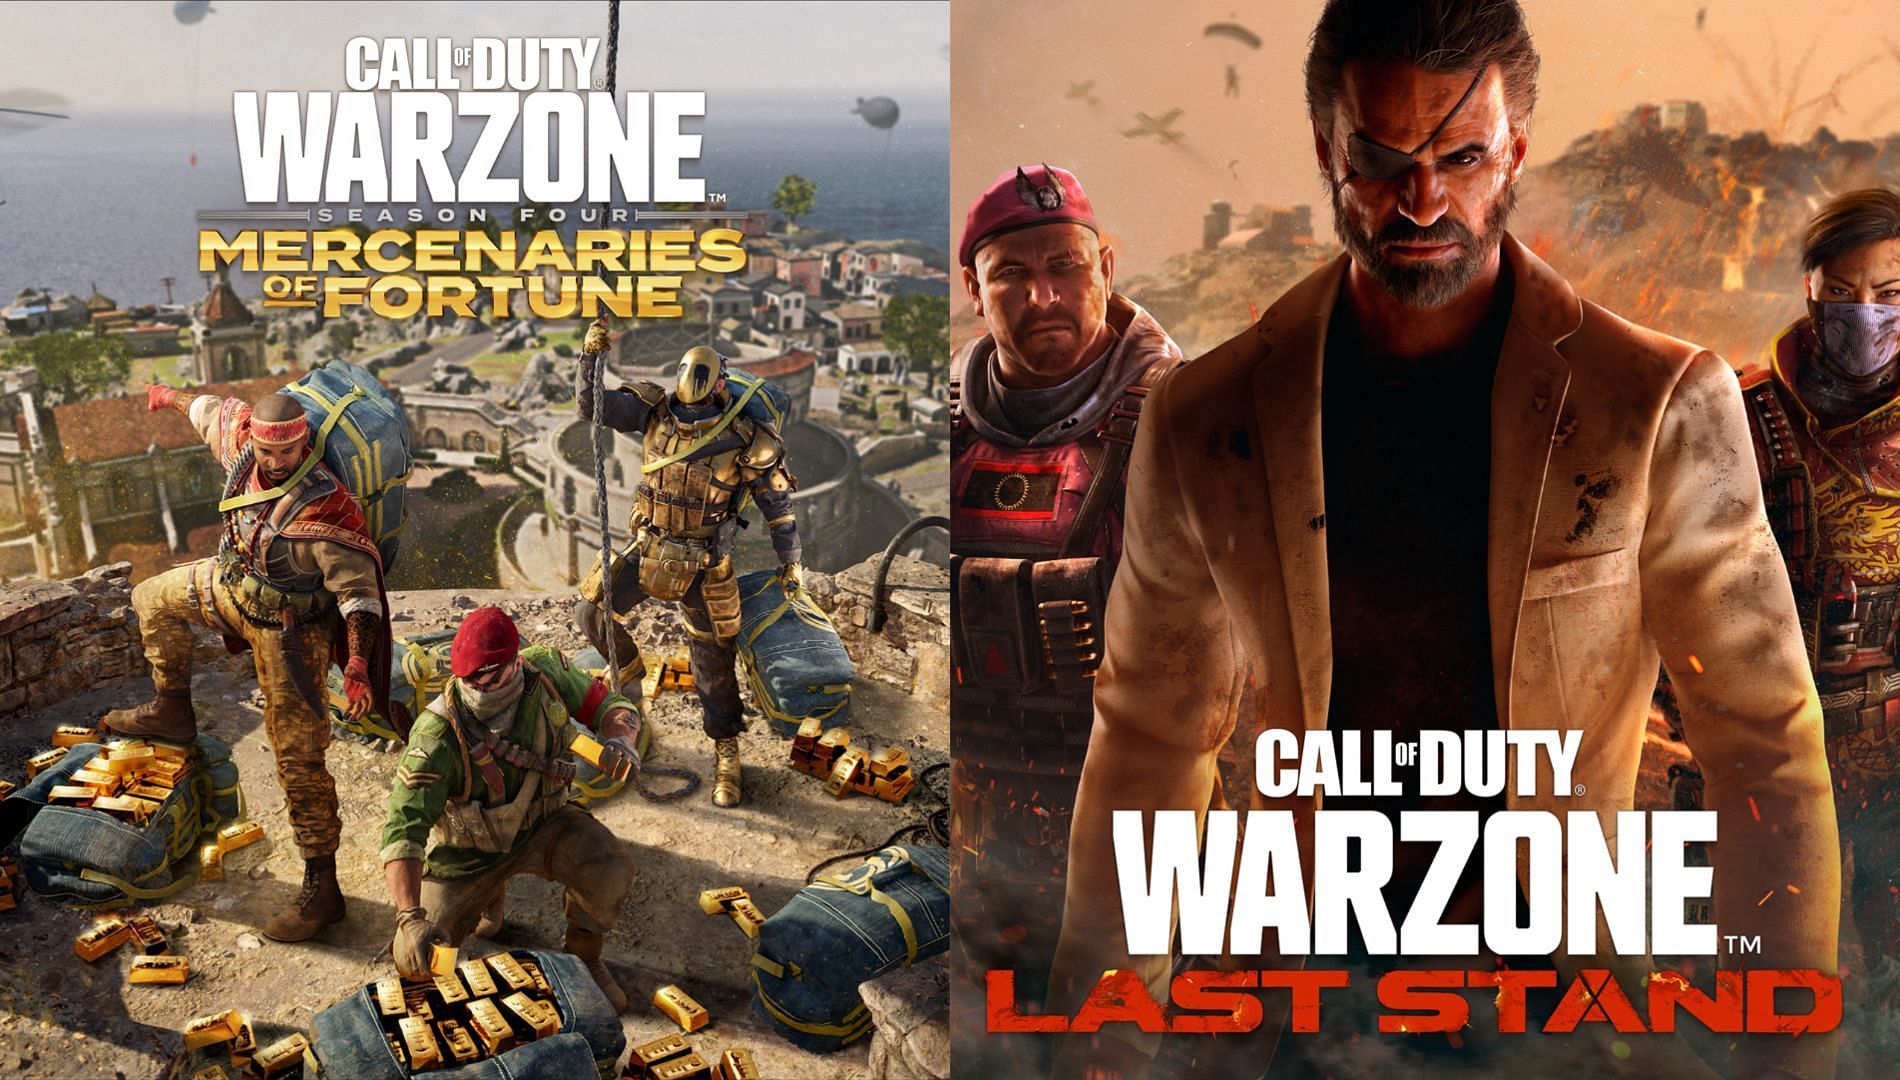 Call of Duty Warzone Season 4 Reloaded ends soon (Image via Activision)